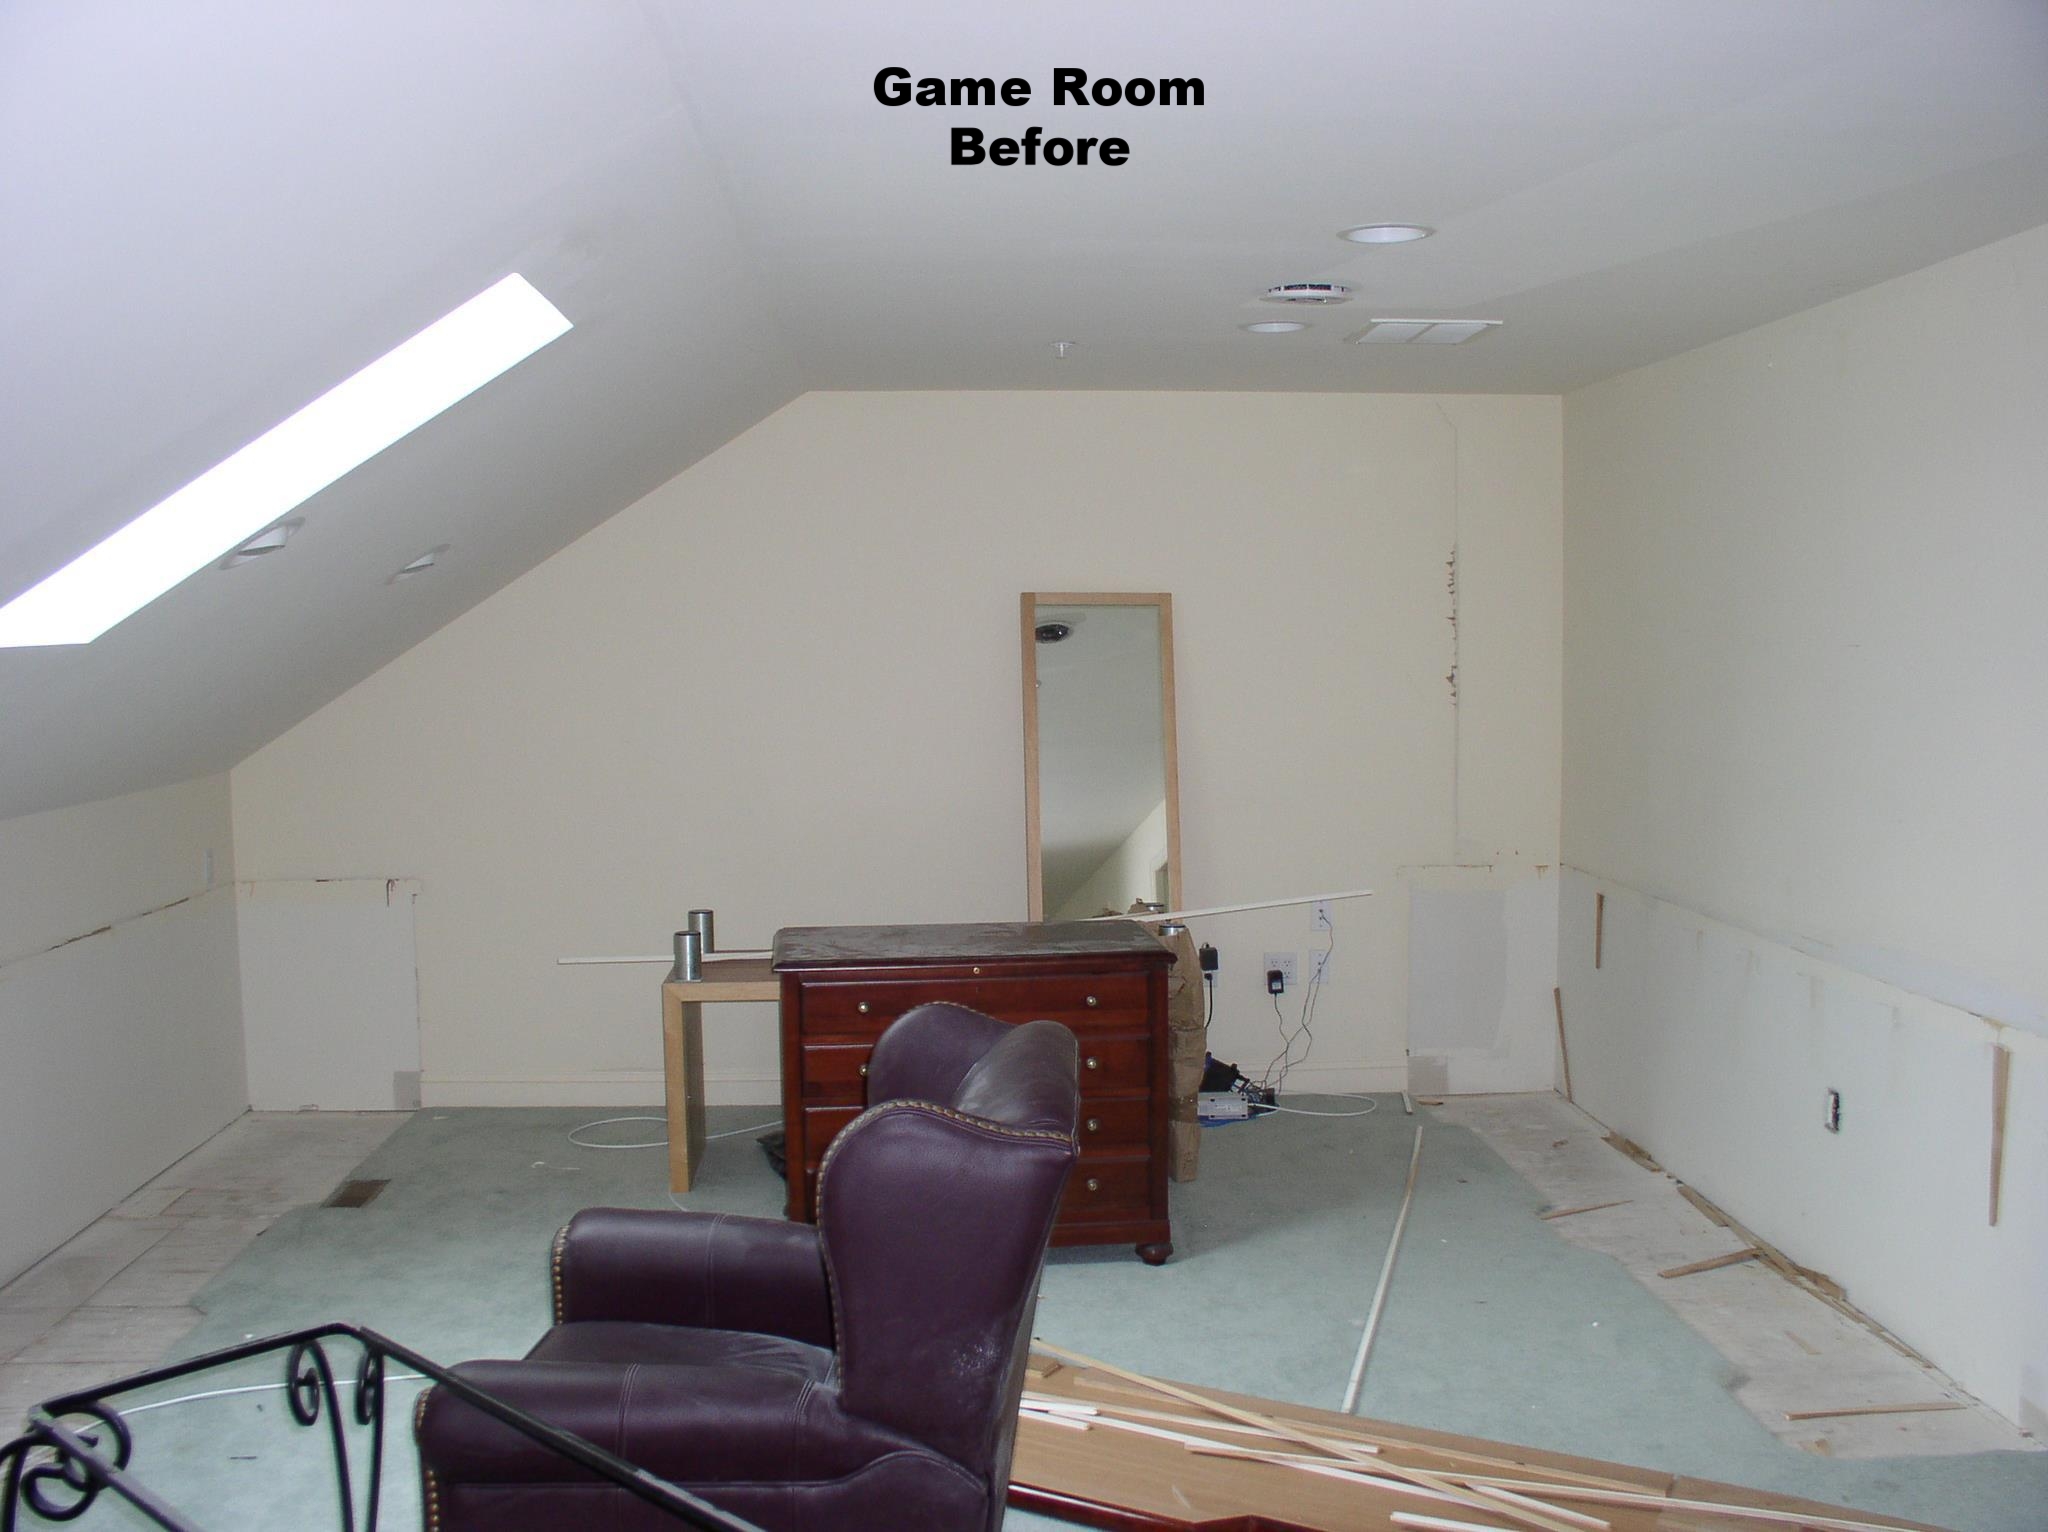 GAME ROOM BEFORE